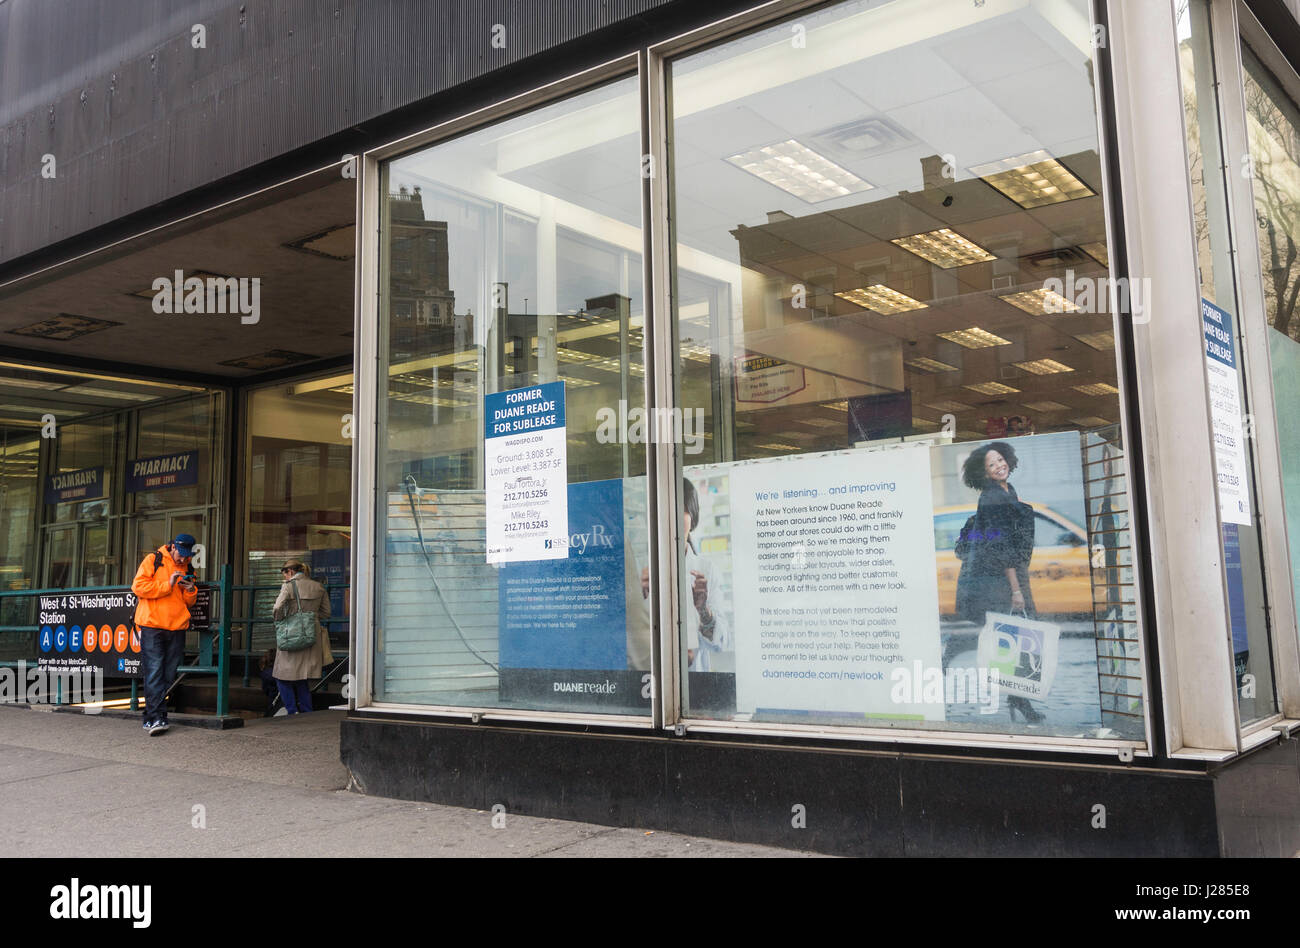 New York, NY, USA 24 April 2017 - A former Duane Reade with the company logo and sign removed continues to attract customers. The regional ever present pharmacutical chain known for having a shop on every other block in the New York City Metropolitan area, began closing some of it's locations this year.  In some instances the parent company, Walgreen's Boots Alliance, cited expiring leases but in this Greenwich Village outlet the company is offering to sublease the space. ©Stacy Walsh Rosenstock Stock Photo